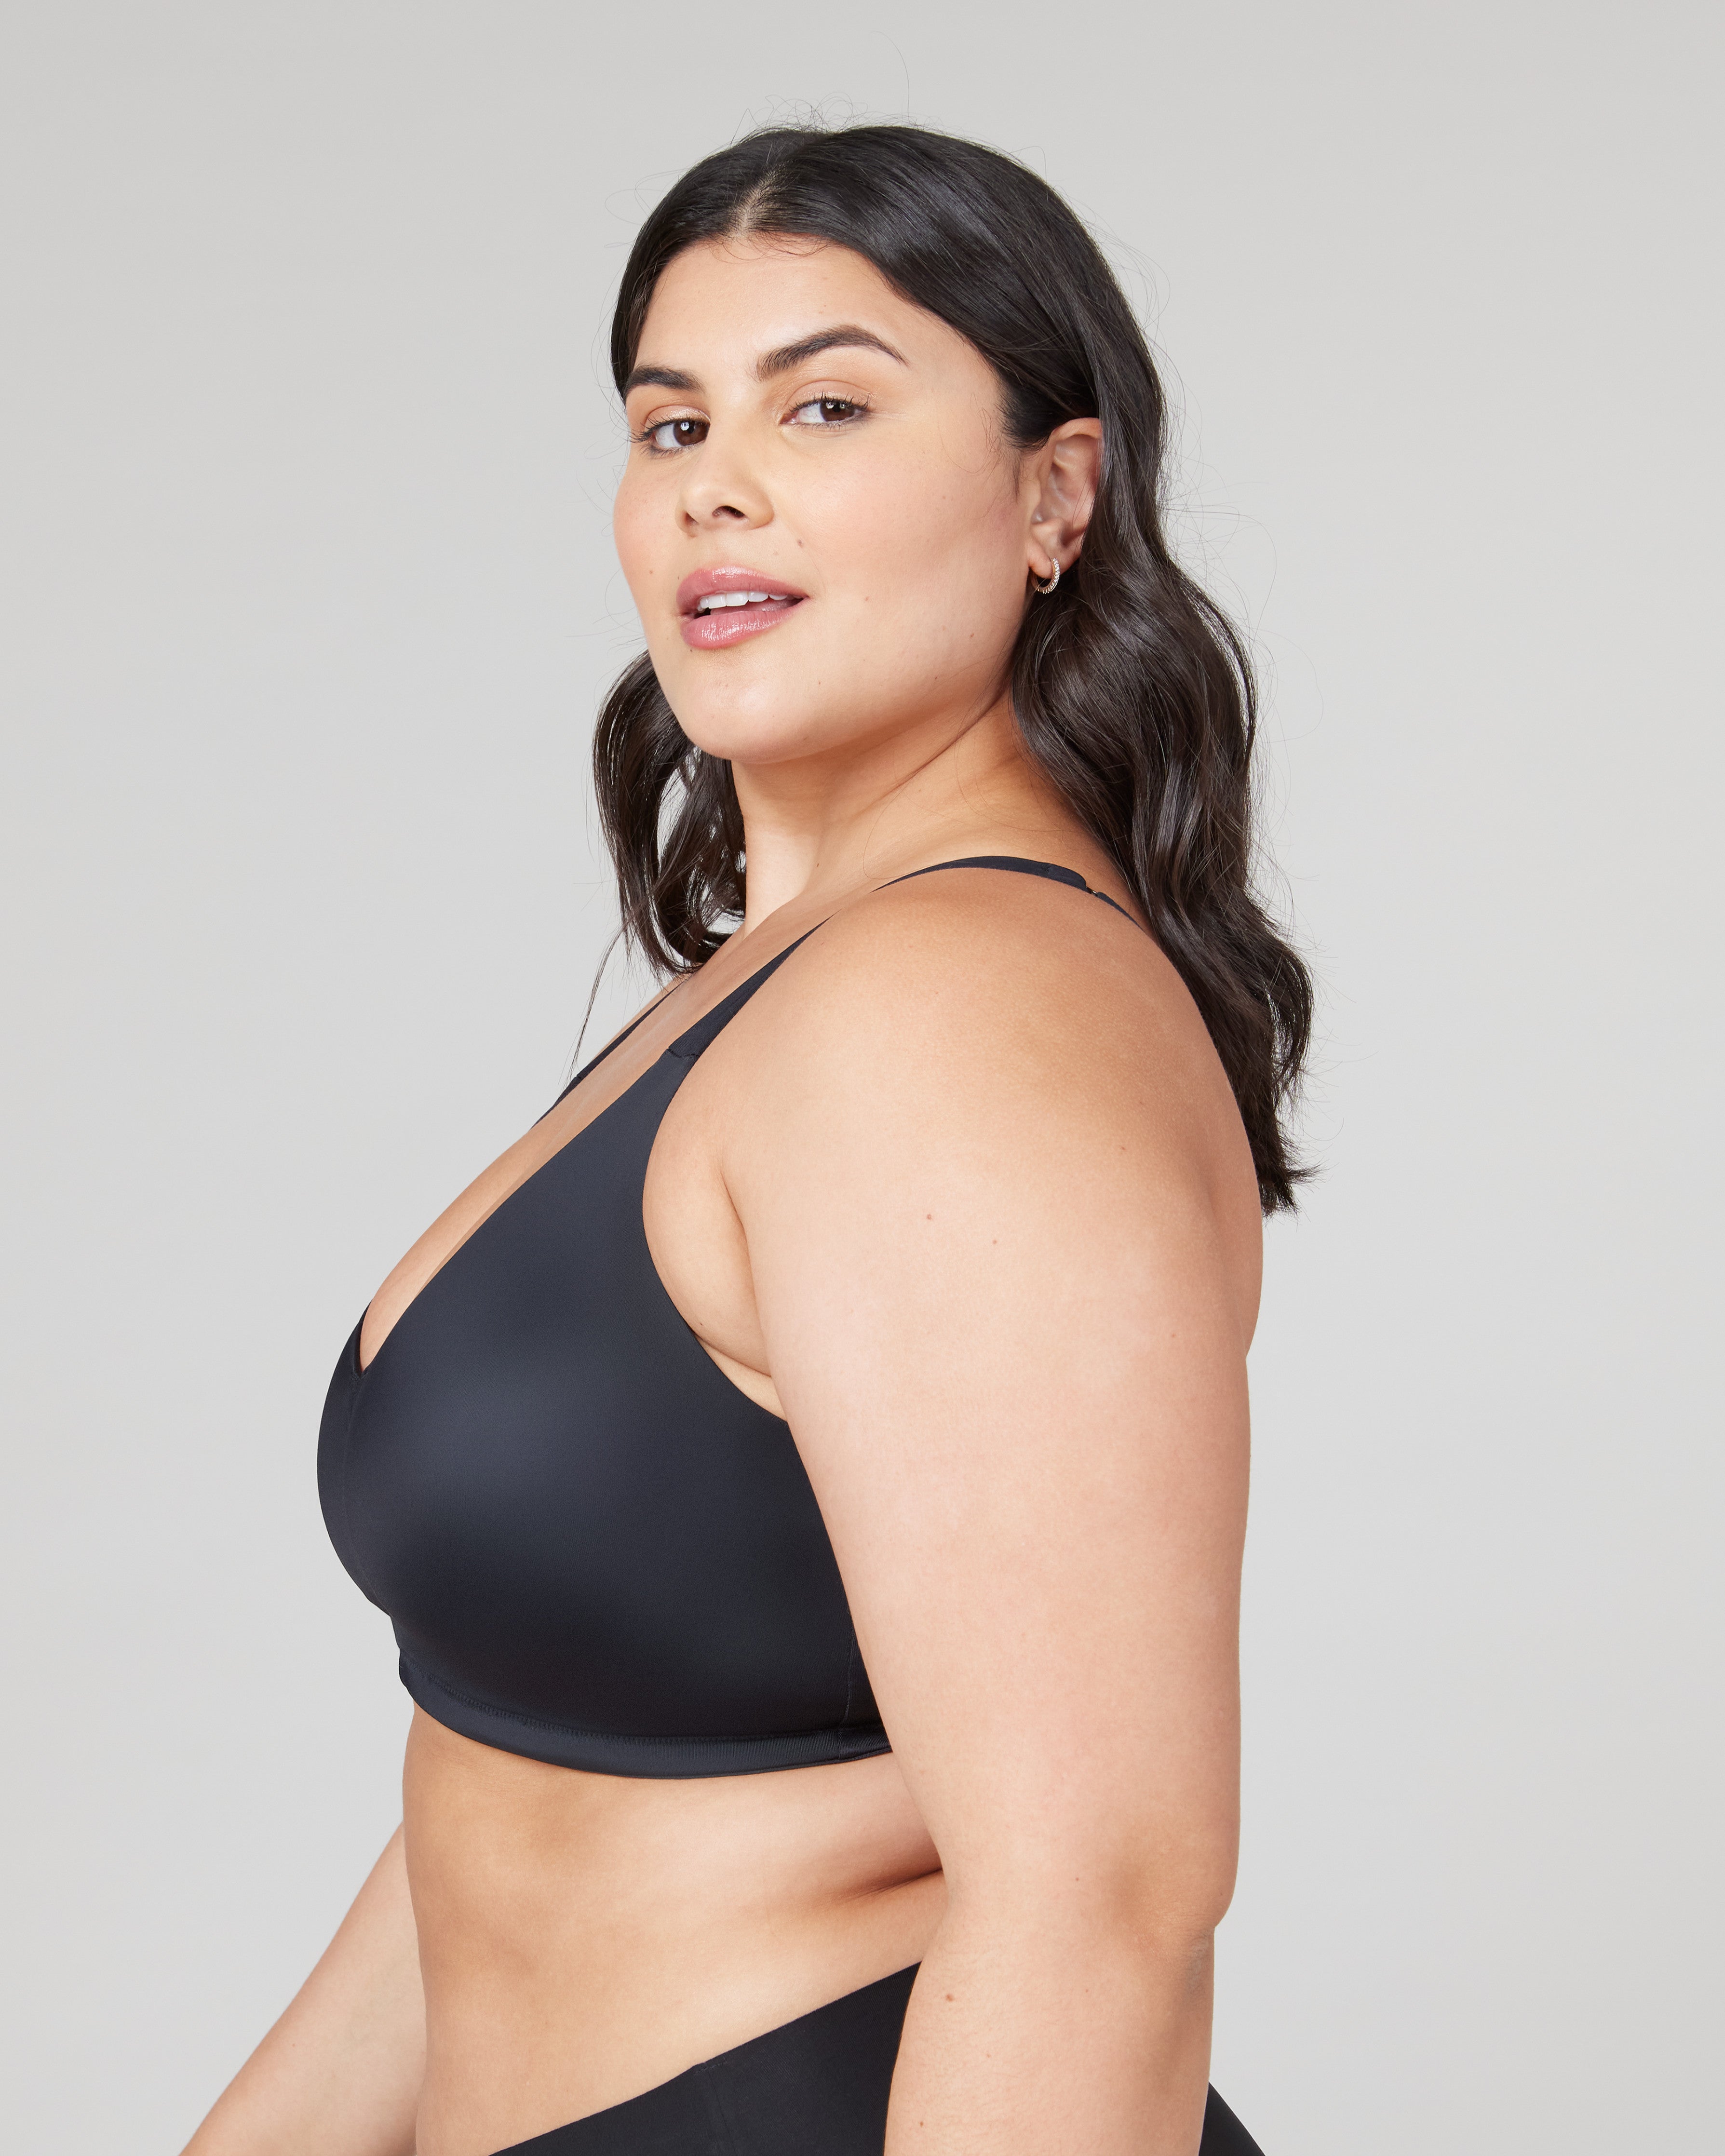 Womens Full Coverage Floral Lace Plus Size Spanx Minimizer Bra With Front  Closure Cotton Racerback Design In White, Black, And Beige DD, E, F, G, H  Style 230603 From Wai02, $33.47